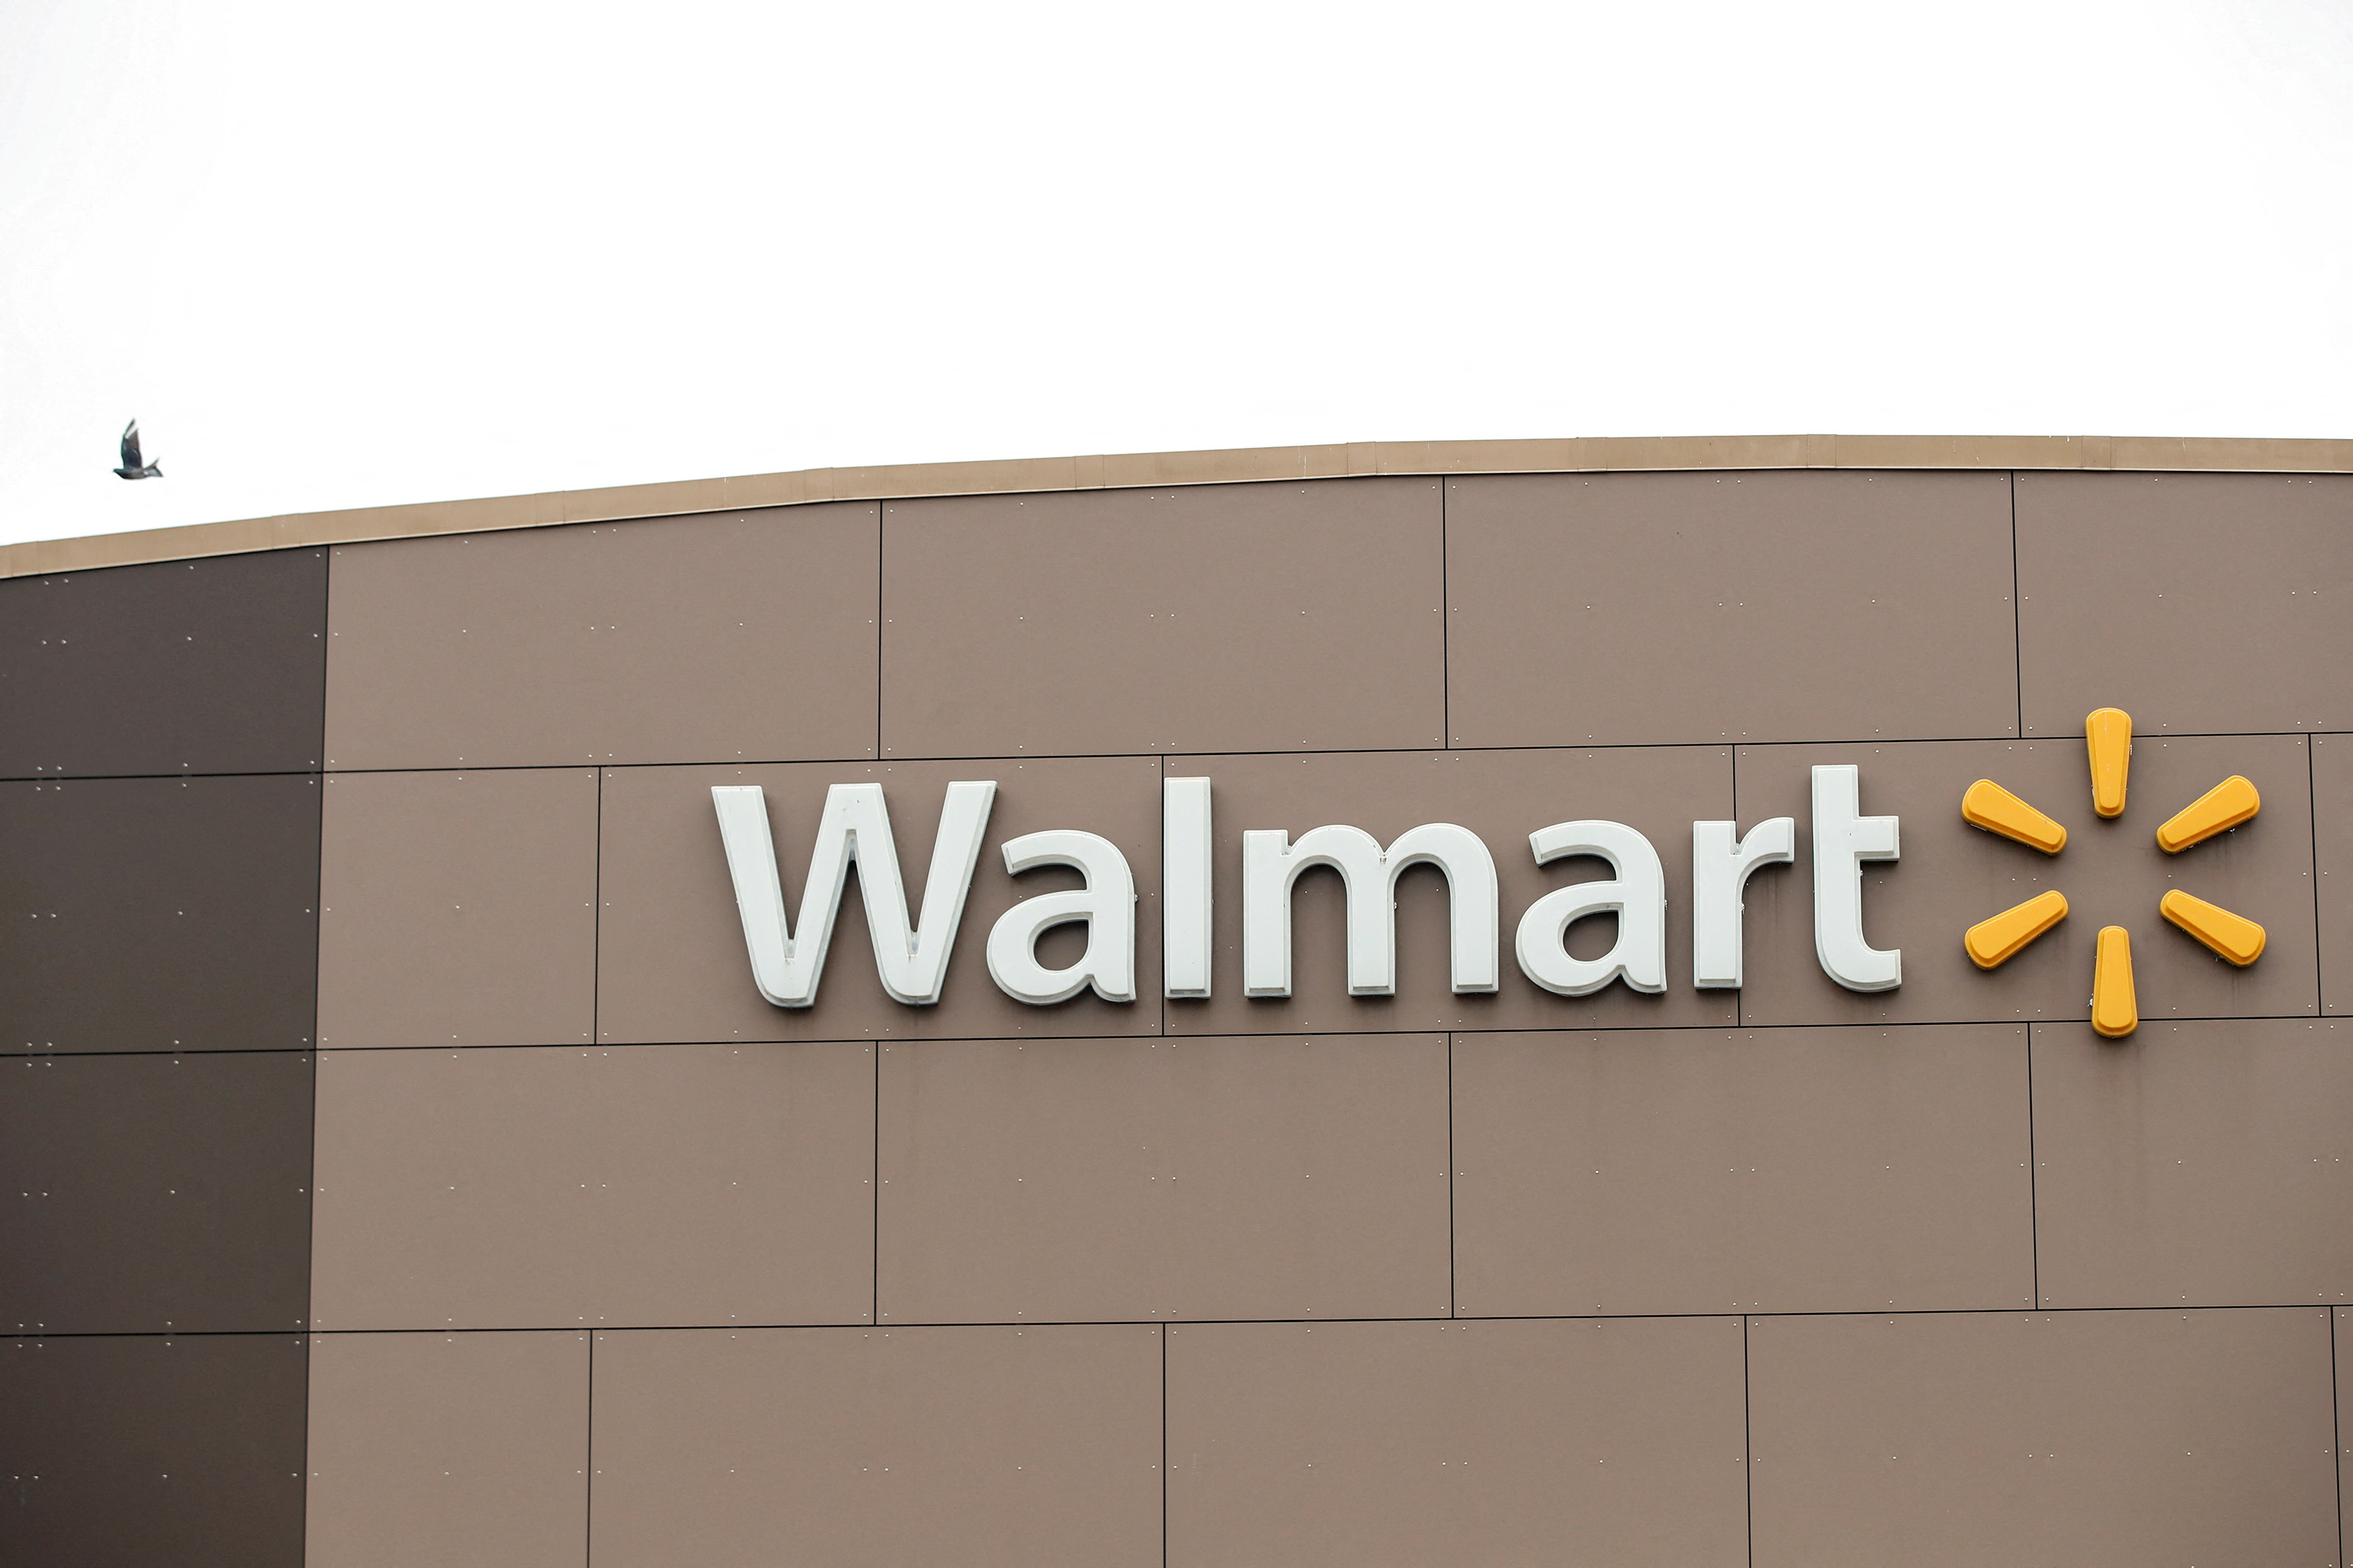 Walmart Corporate News and Information